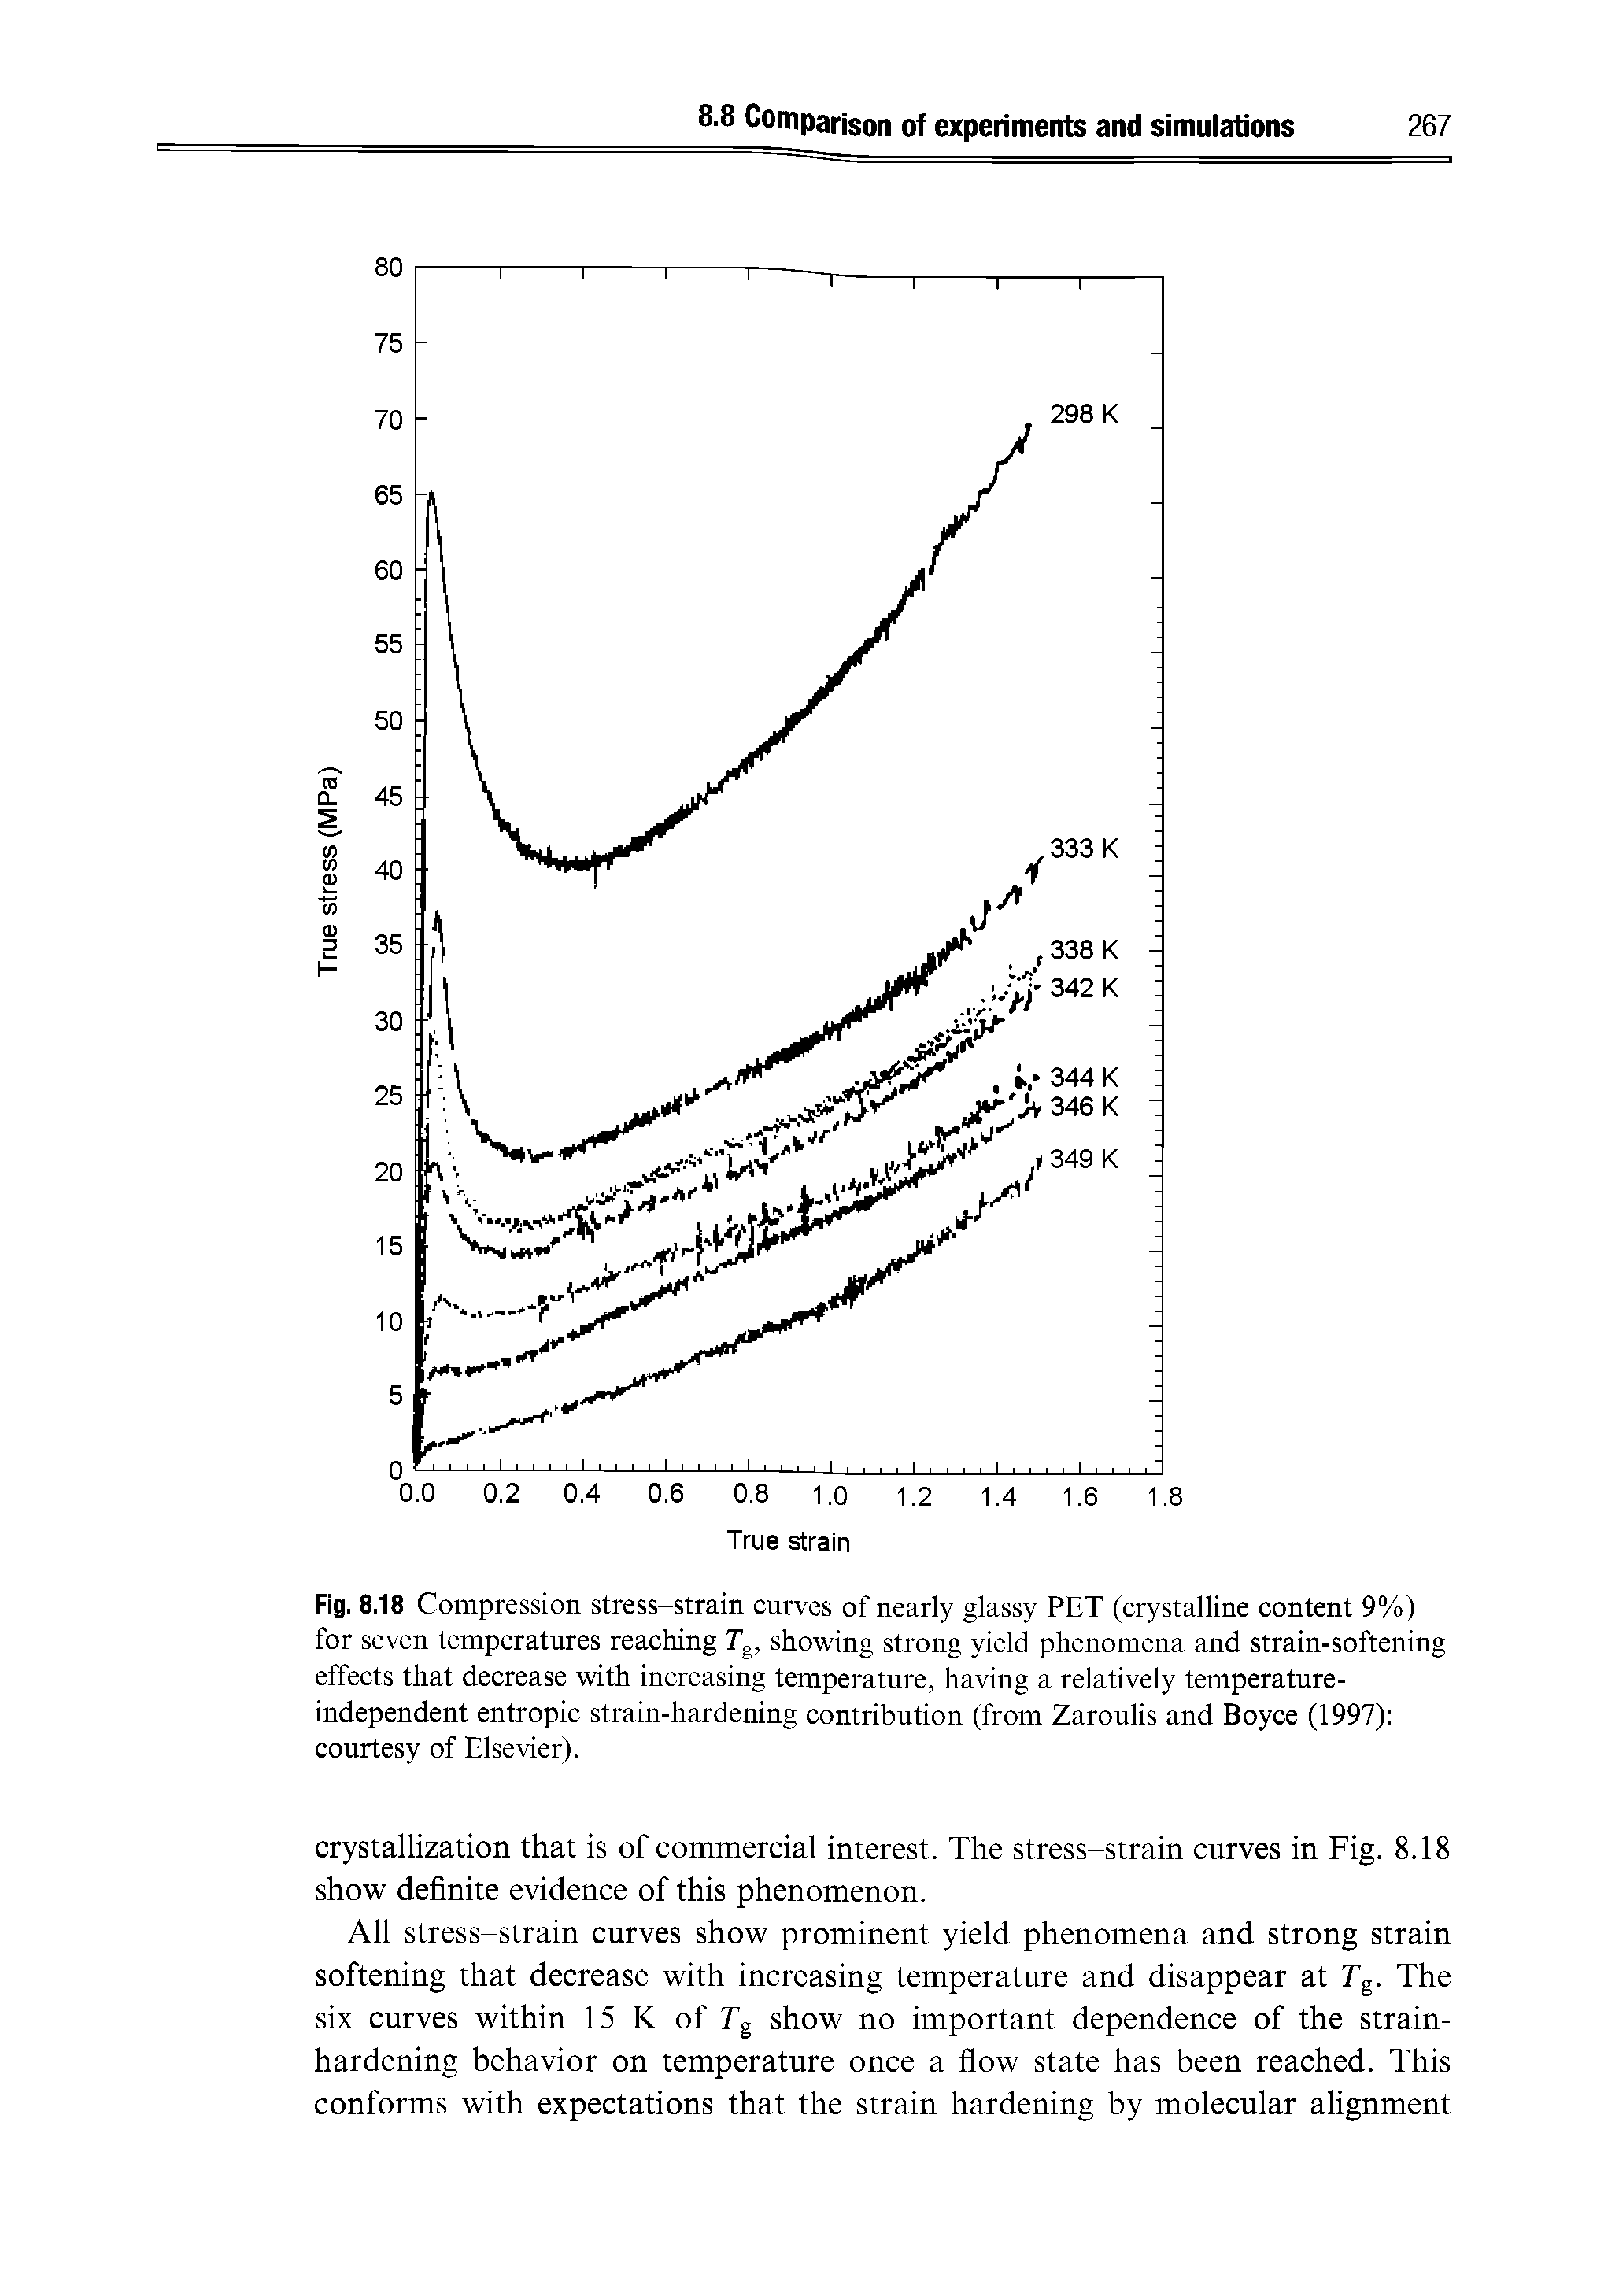 Fig. 8.18 Compression stress-strain curves of nearly glassy PET (crystalline content 9%) for seven temperatures reaching Tg, showing strong yield phenomena and strain-softening effects that decrease with increasing temperature, having a relatively temperature-independent entropic strain-hardening contribution (from Zaroulis and Boyce (1997) courtesy of Elsevier).